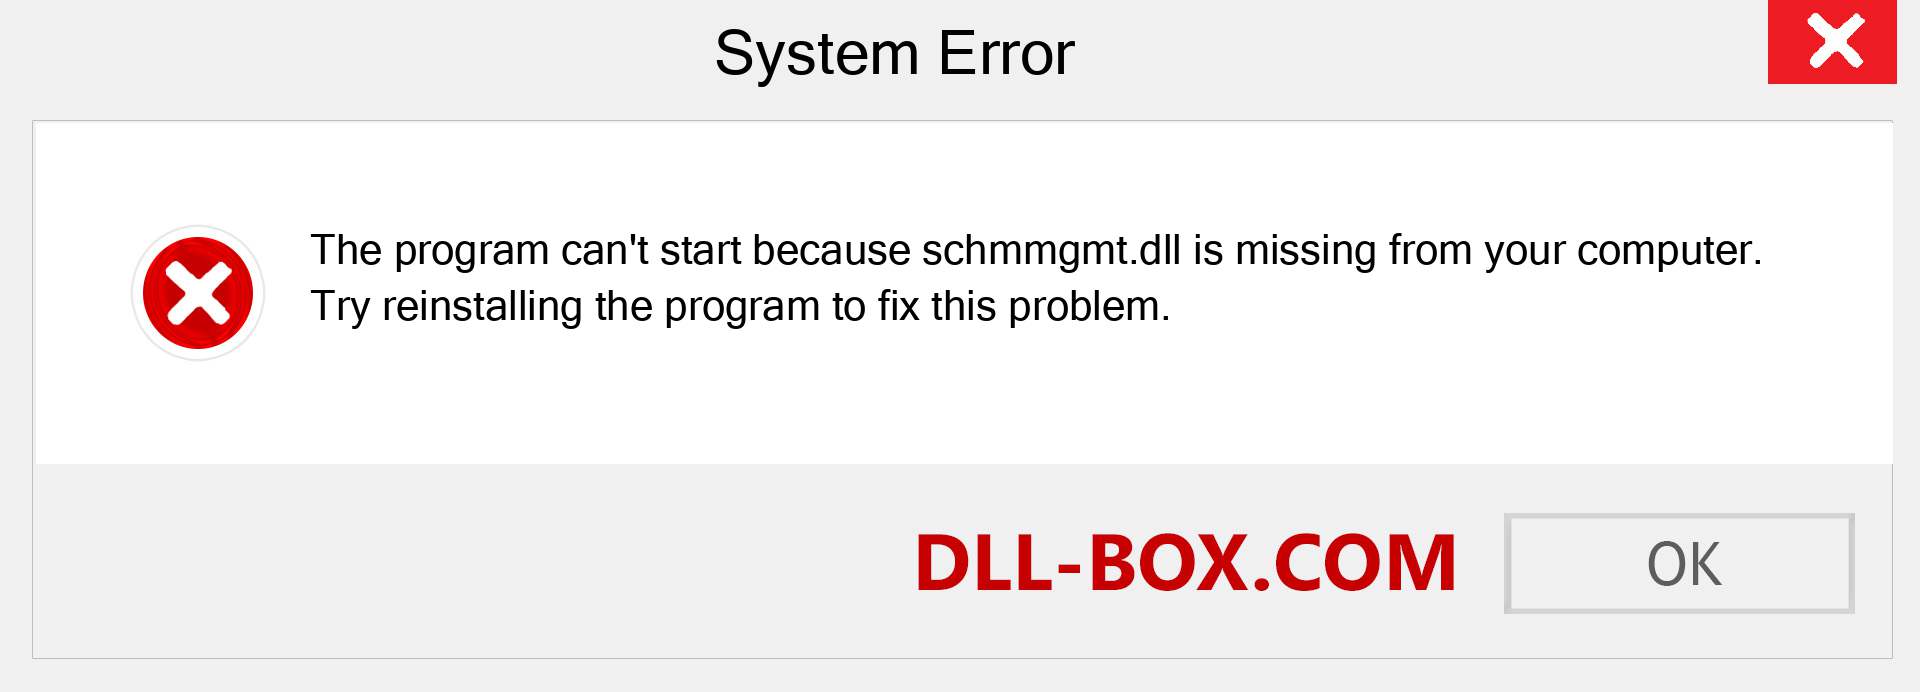  schmmgmt.dll file is missing?. Download for Windows 7, 8, 10 - Fix  schmmgmt dll Missing Error on Windows, photos, images